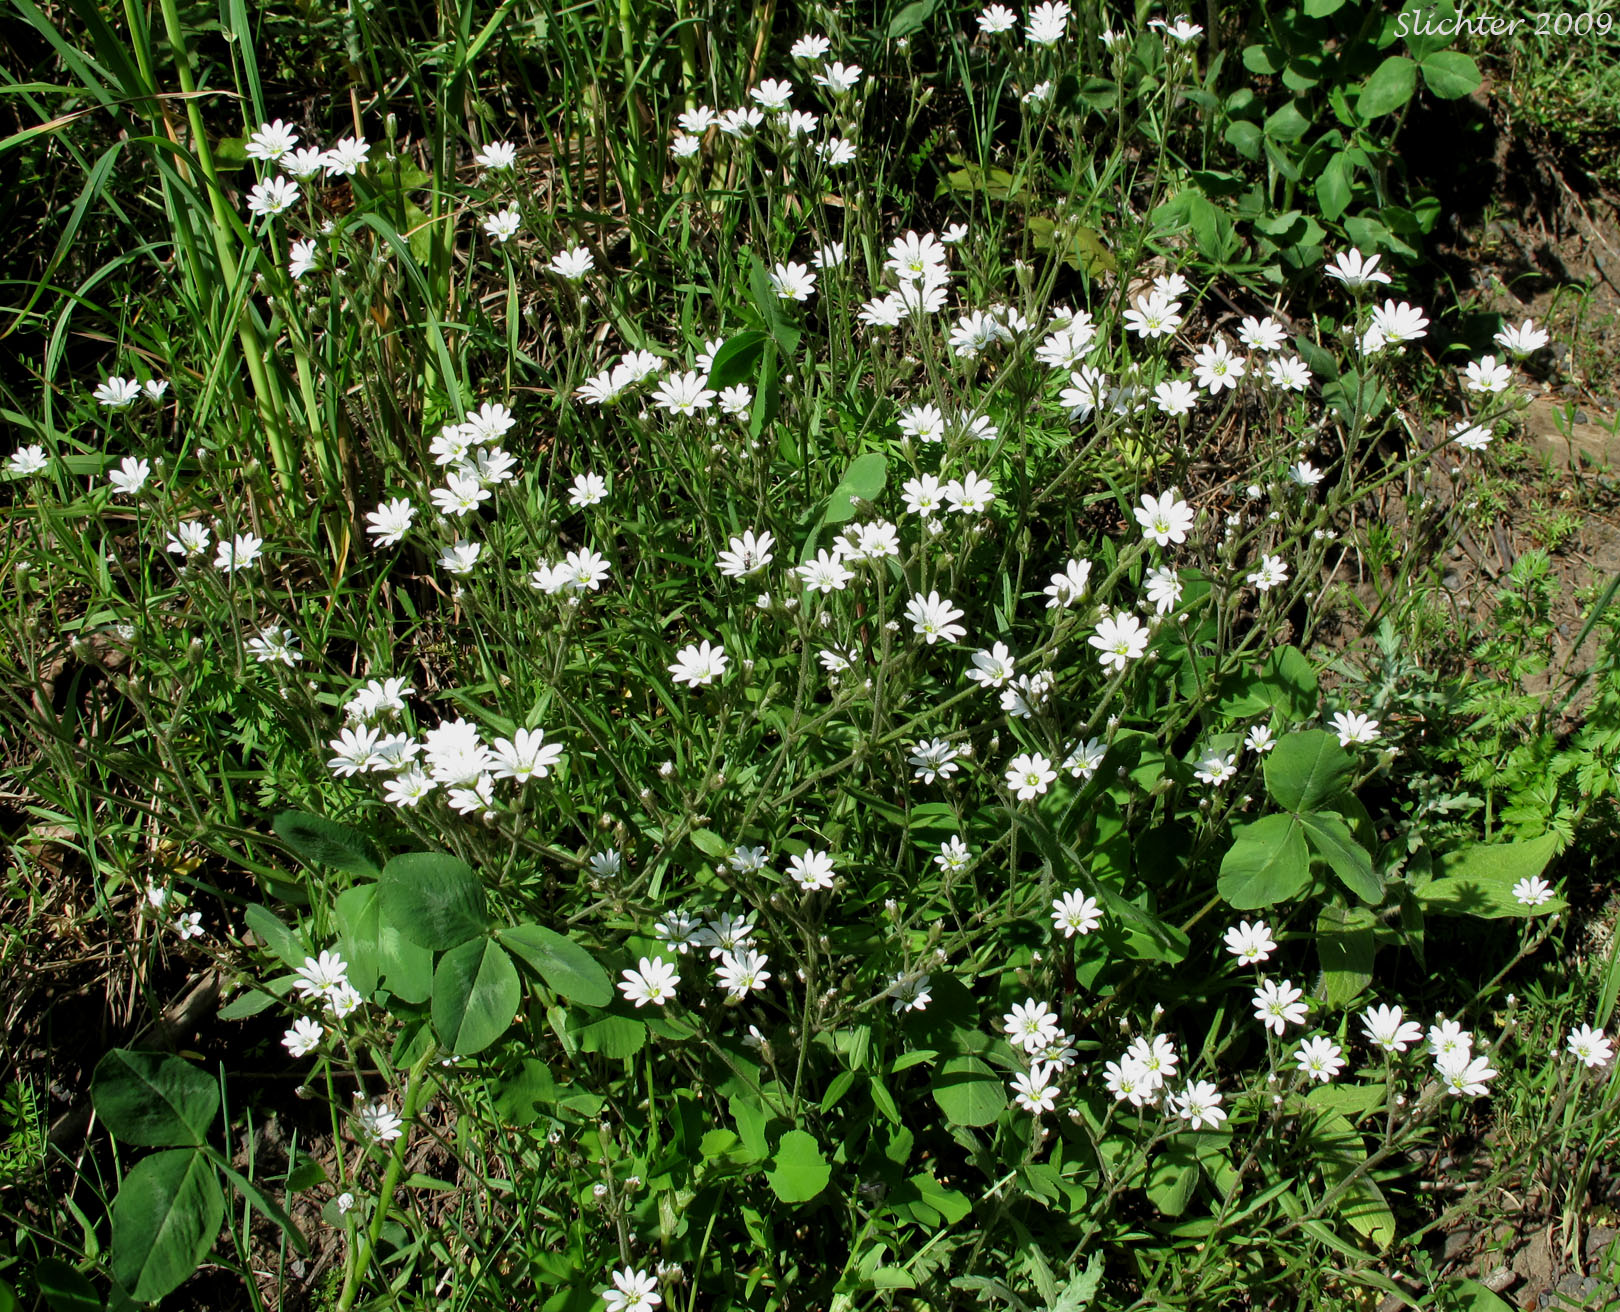 Field Chickweed, Field Mouse Ear: Cerastium arvense ssp. strictum (Synonym: Cerastium arvense ssp. maximum)